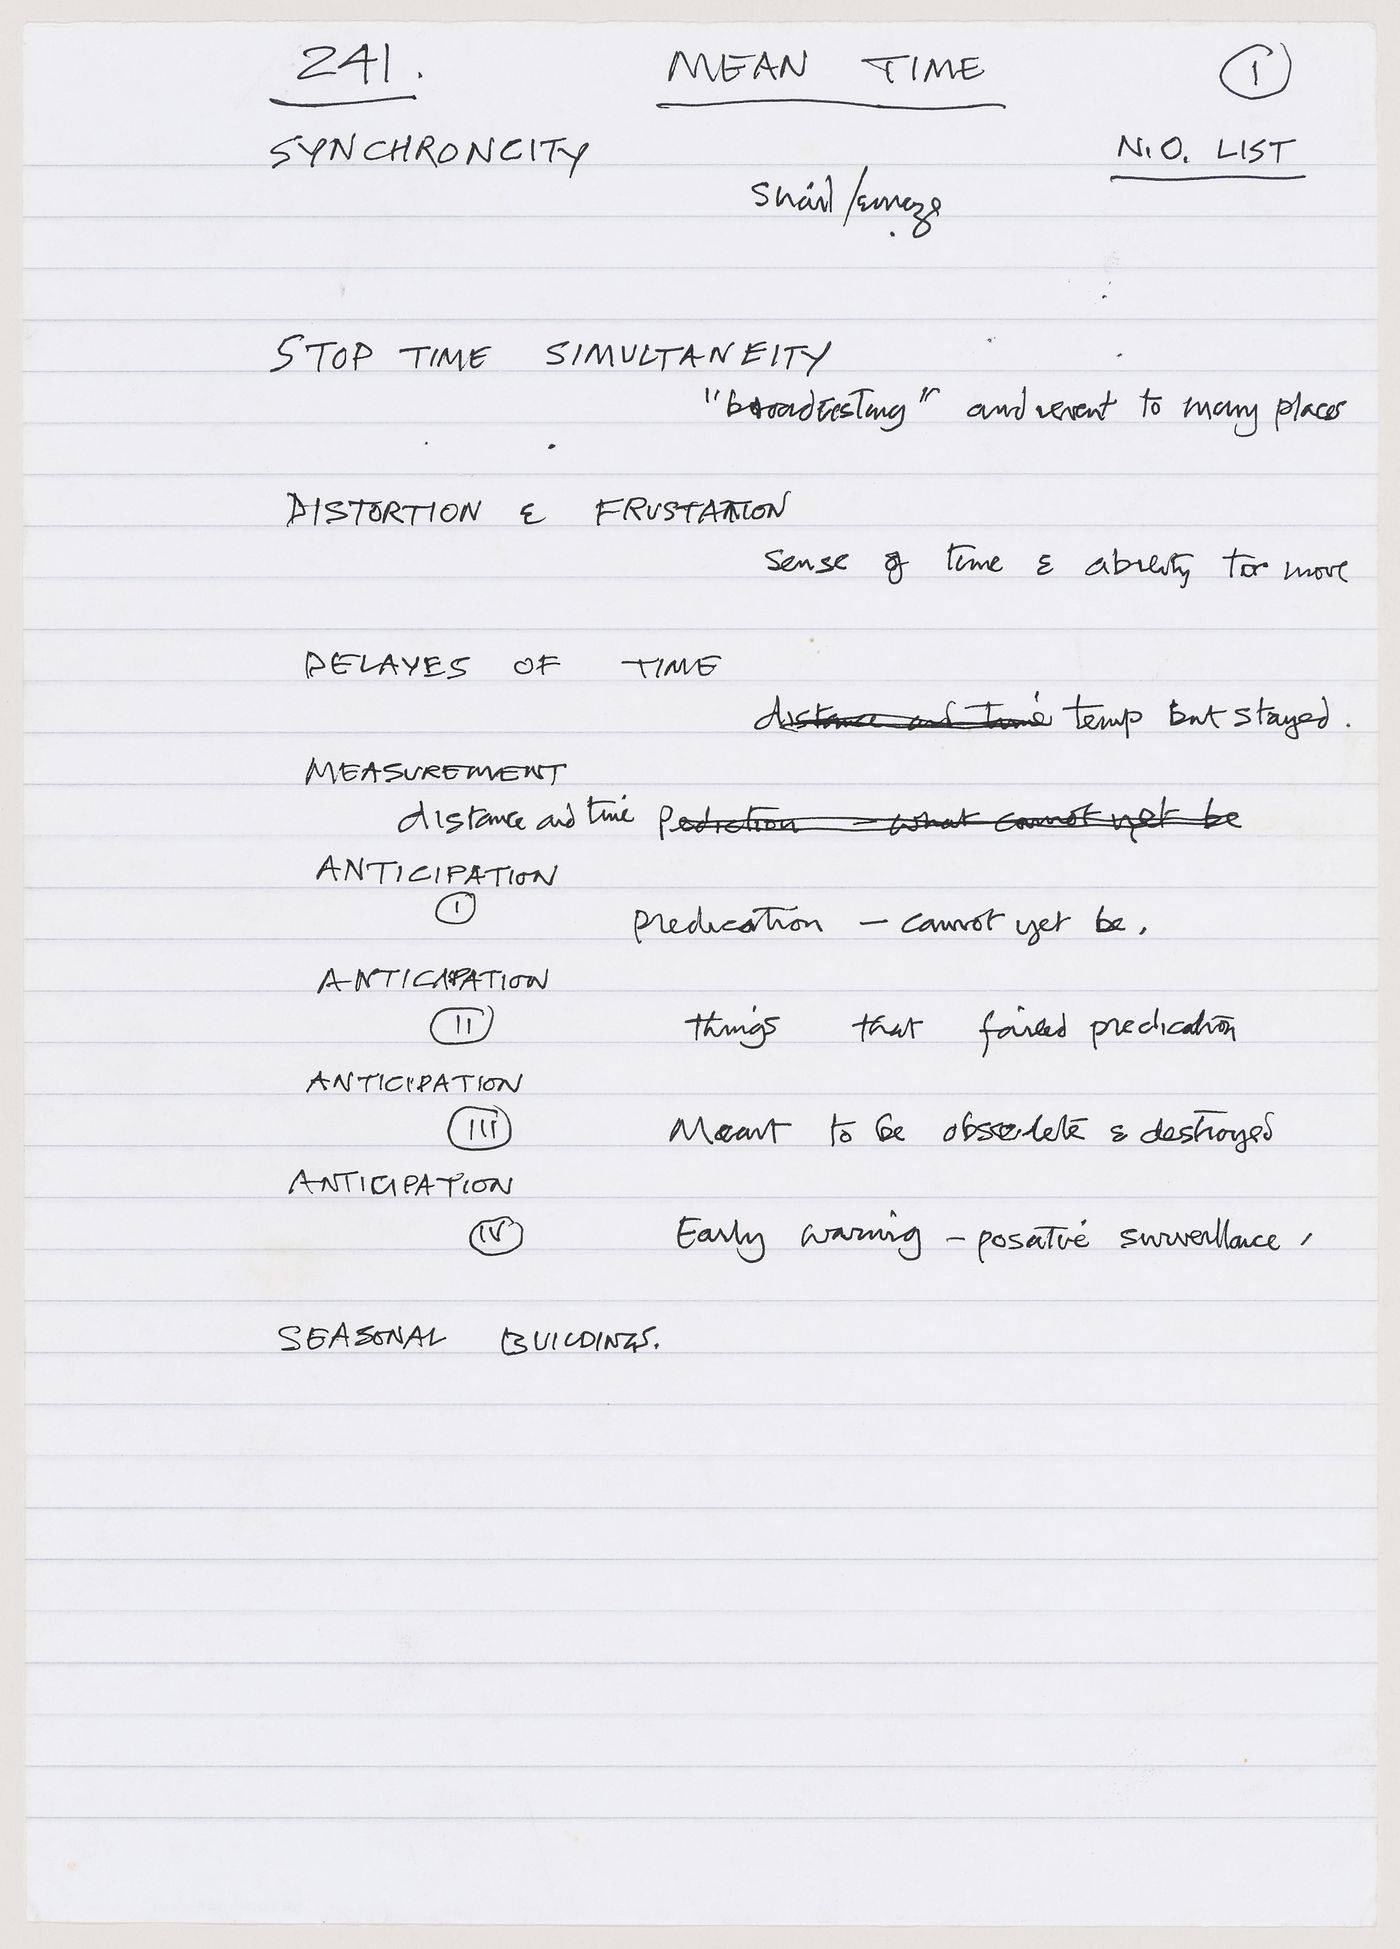 List of concepts related to the concept of time, compiled in the context of preparing the exhibition "Cedric Price: Mean Time" at the Canadian Centre for Architecture (document from Mean project records)